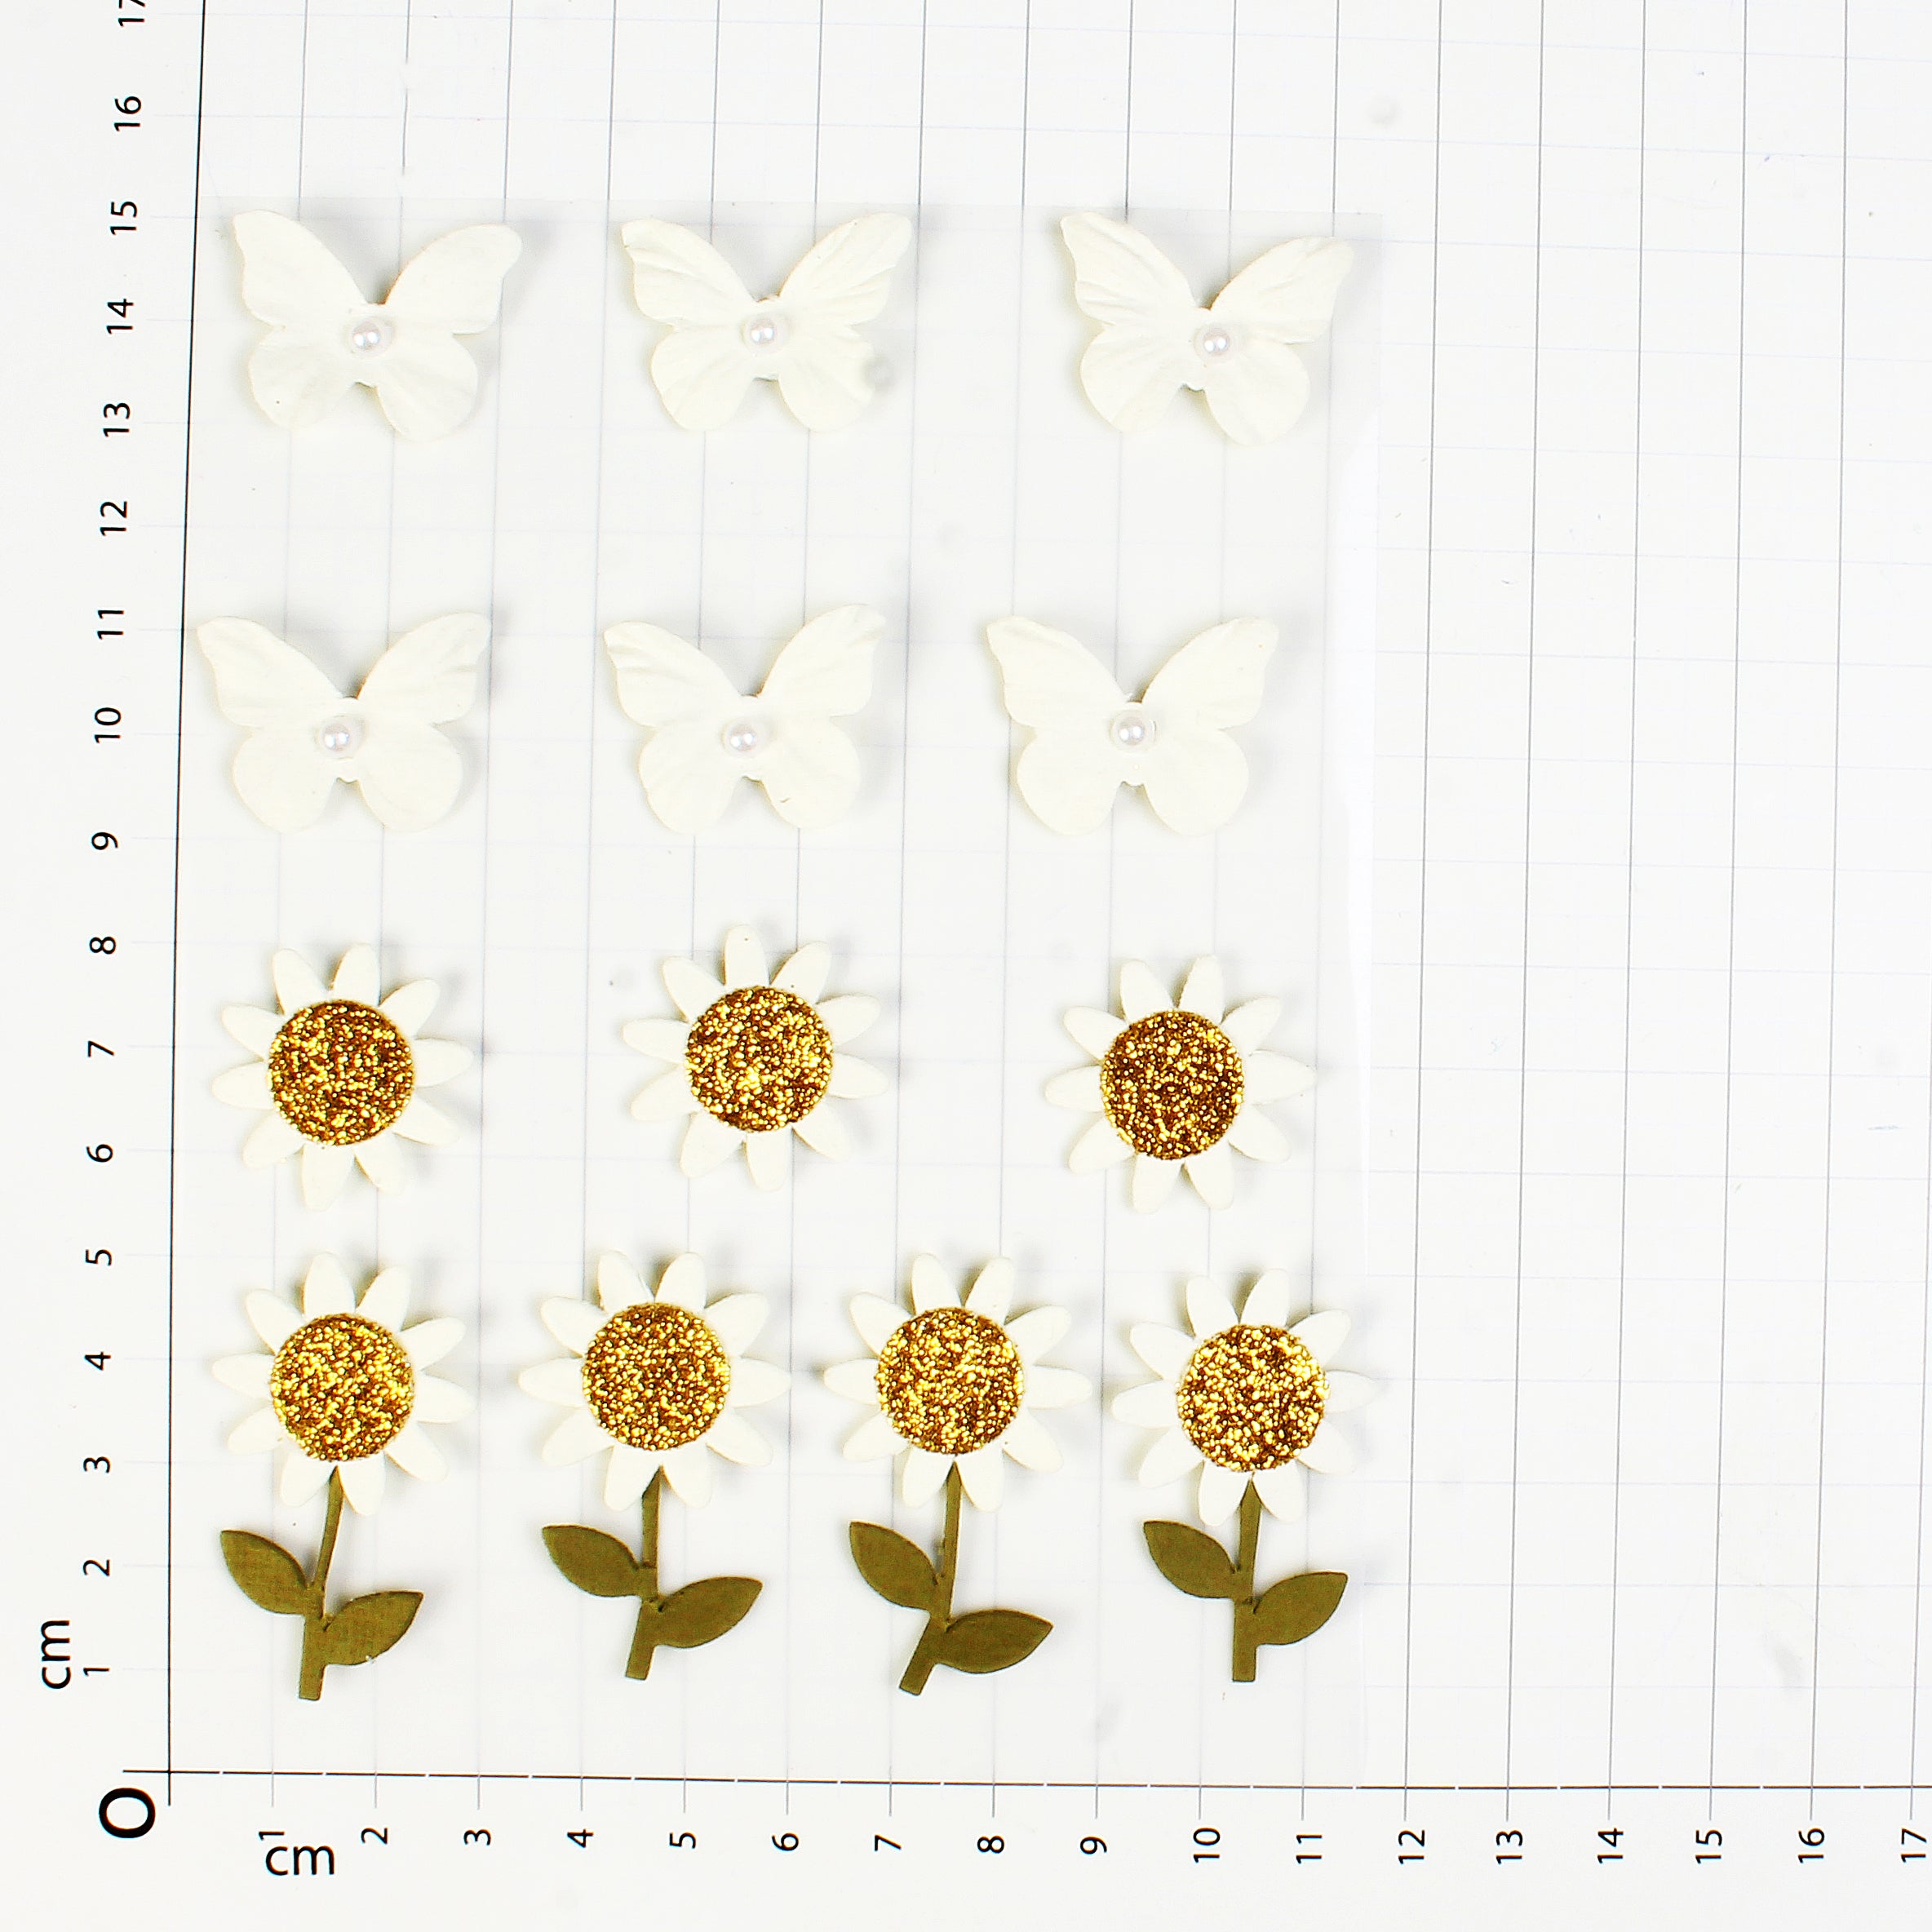 Self Adhesive Stickers Blooms & Butterflies Ivory Delight 13Pc Pbci Lb